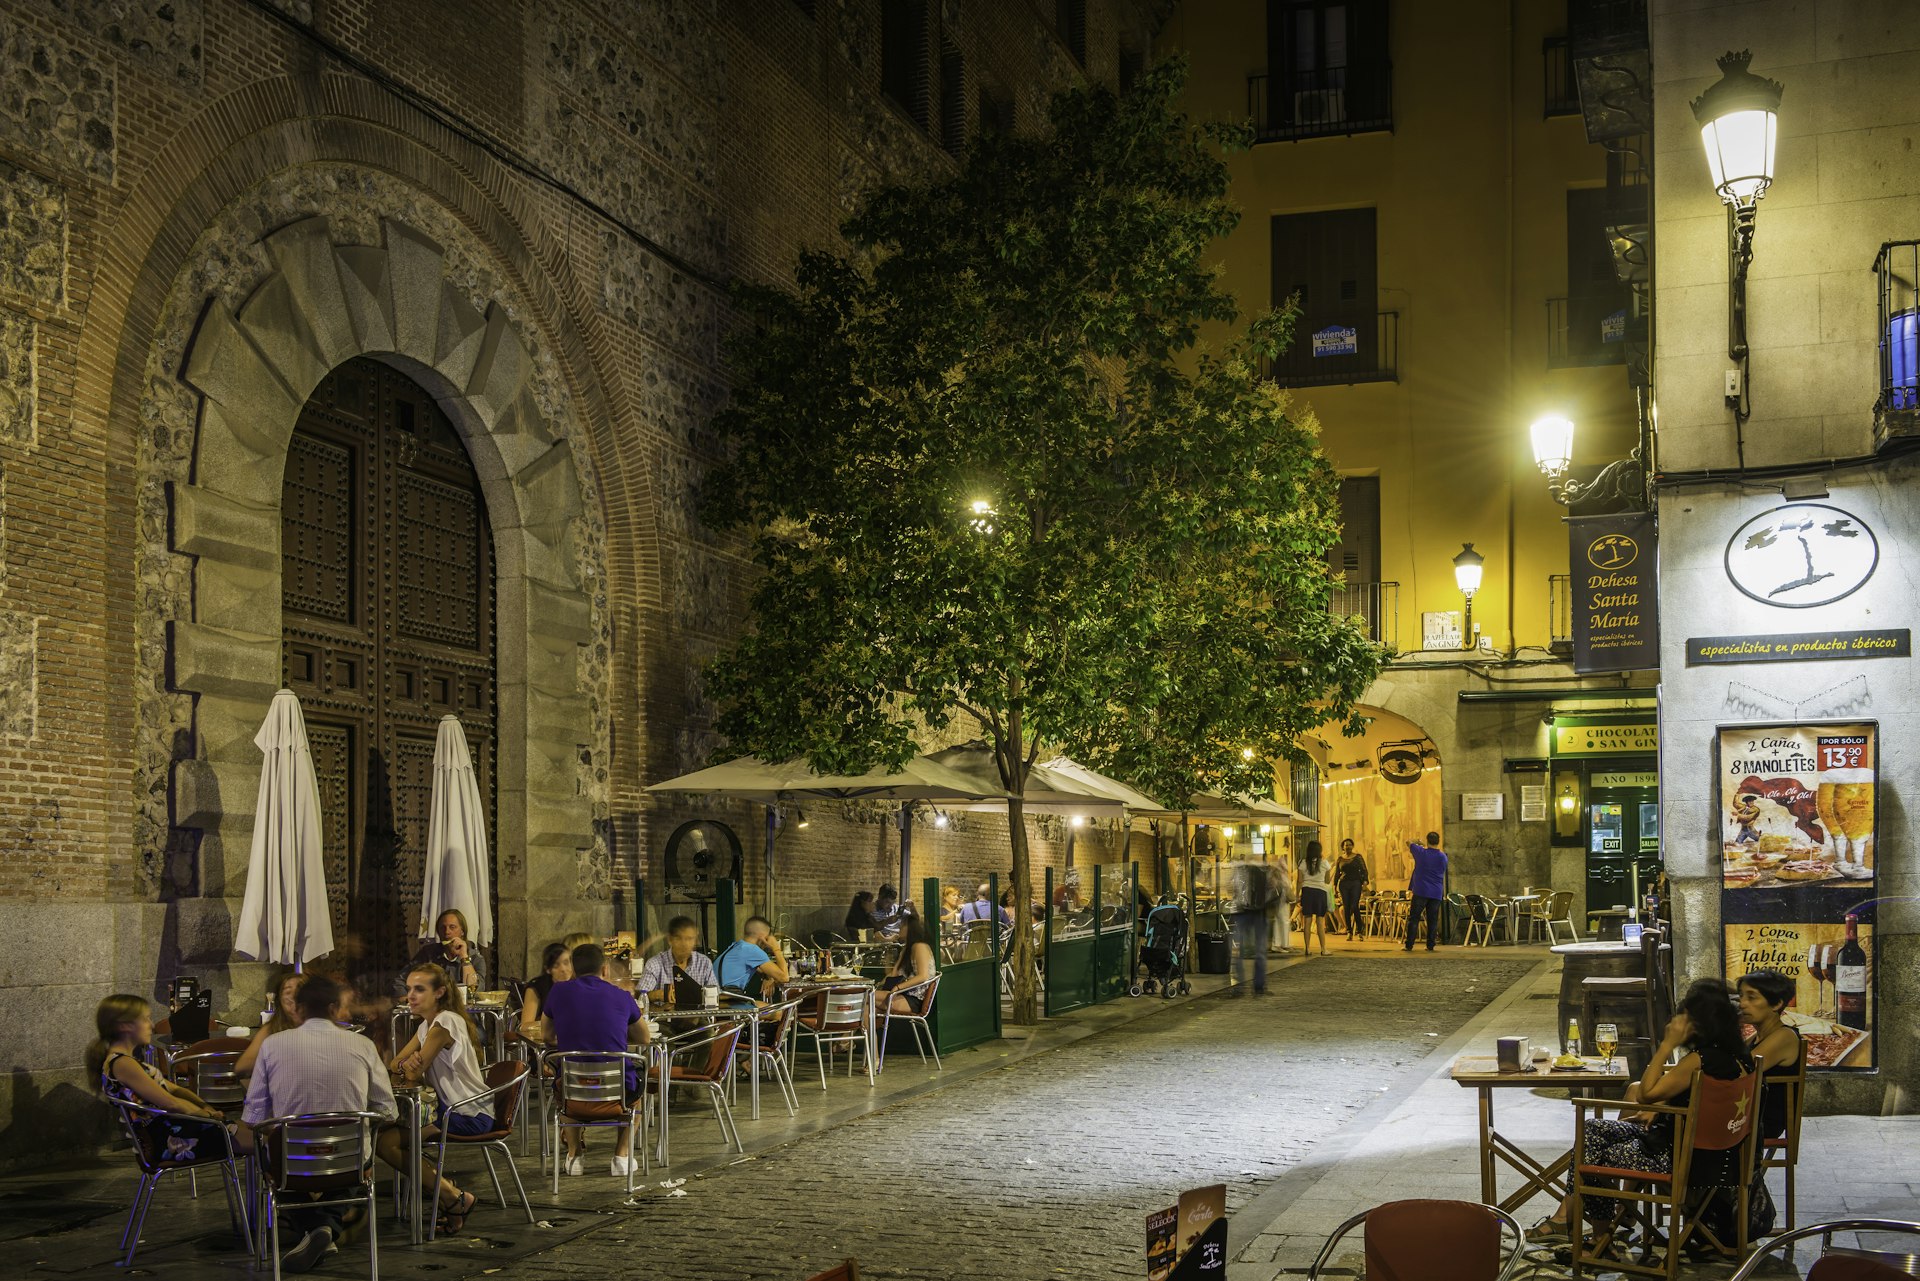 People relaxing at the al fresco tables of a pavement restaurant bar illuminated by the warm lamp light of historic central Madrid, Spain's vibrant capital city.